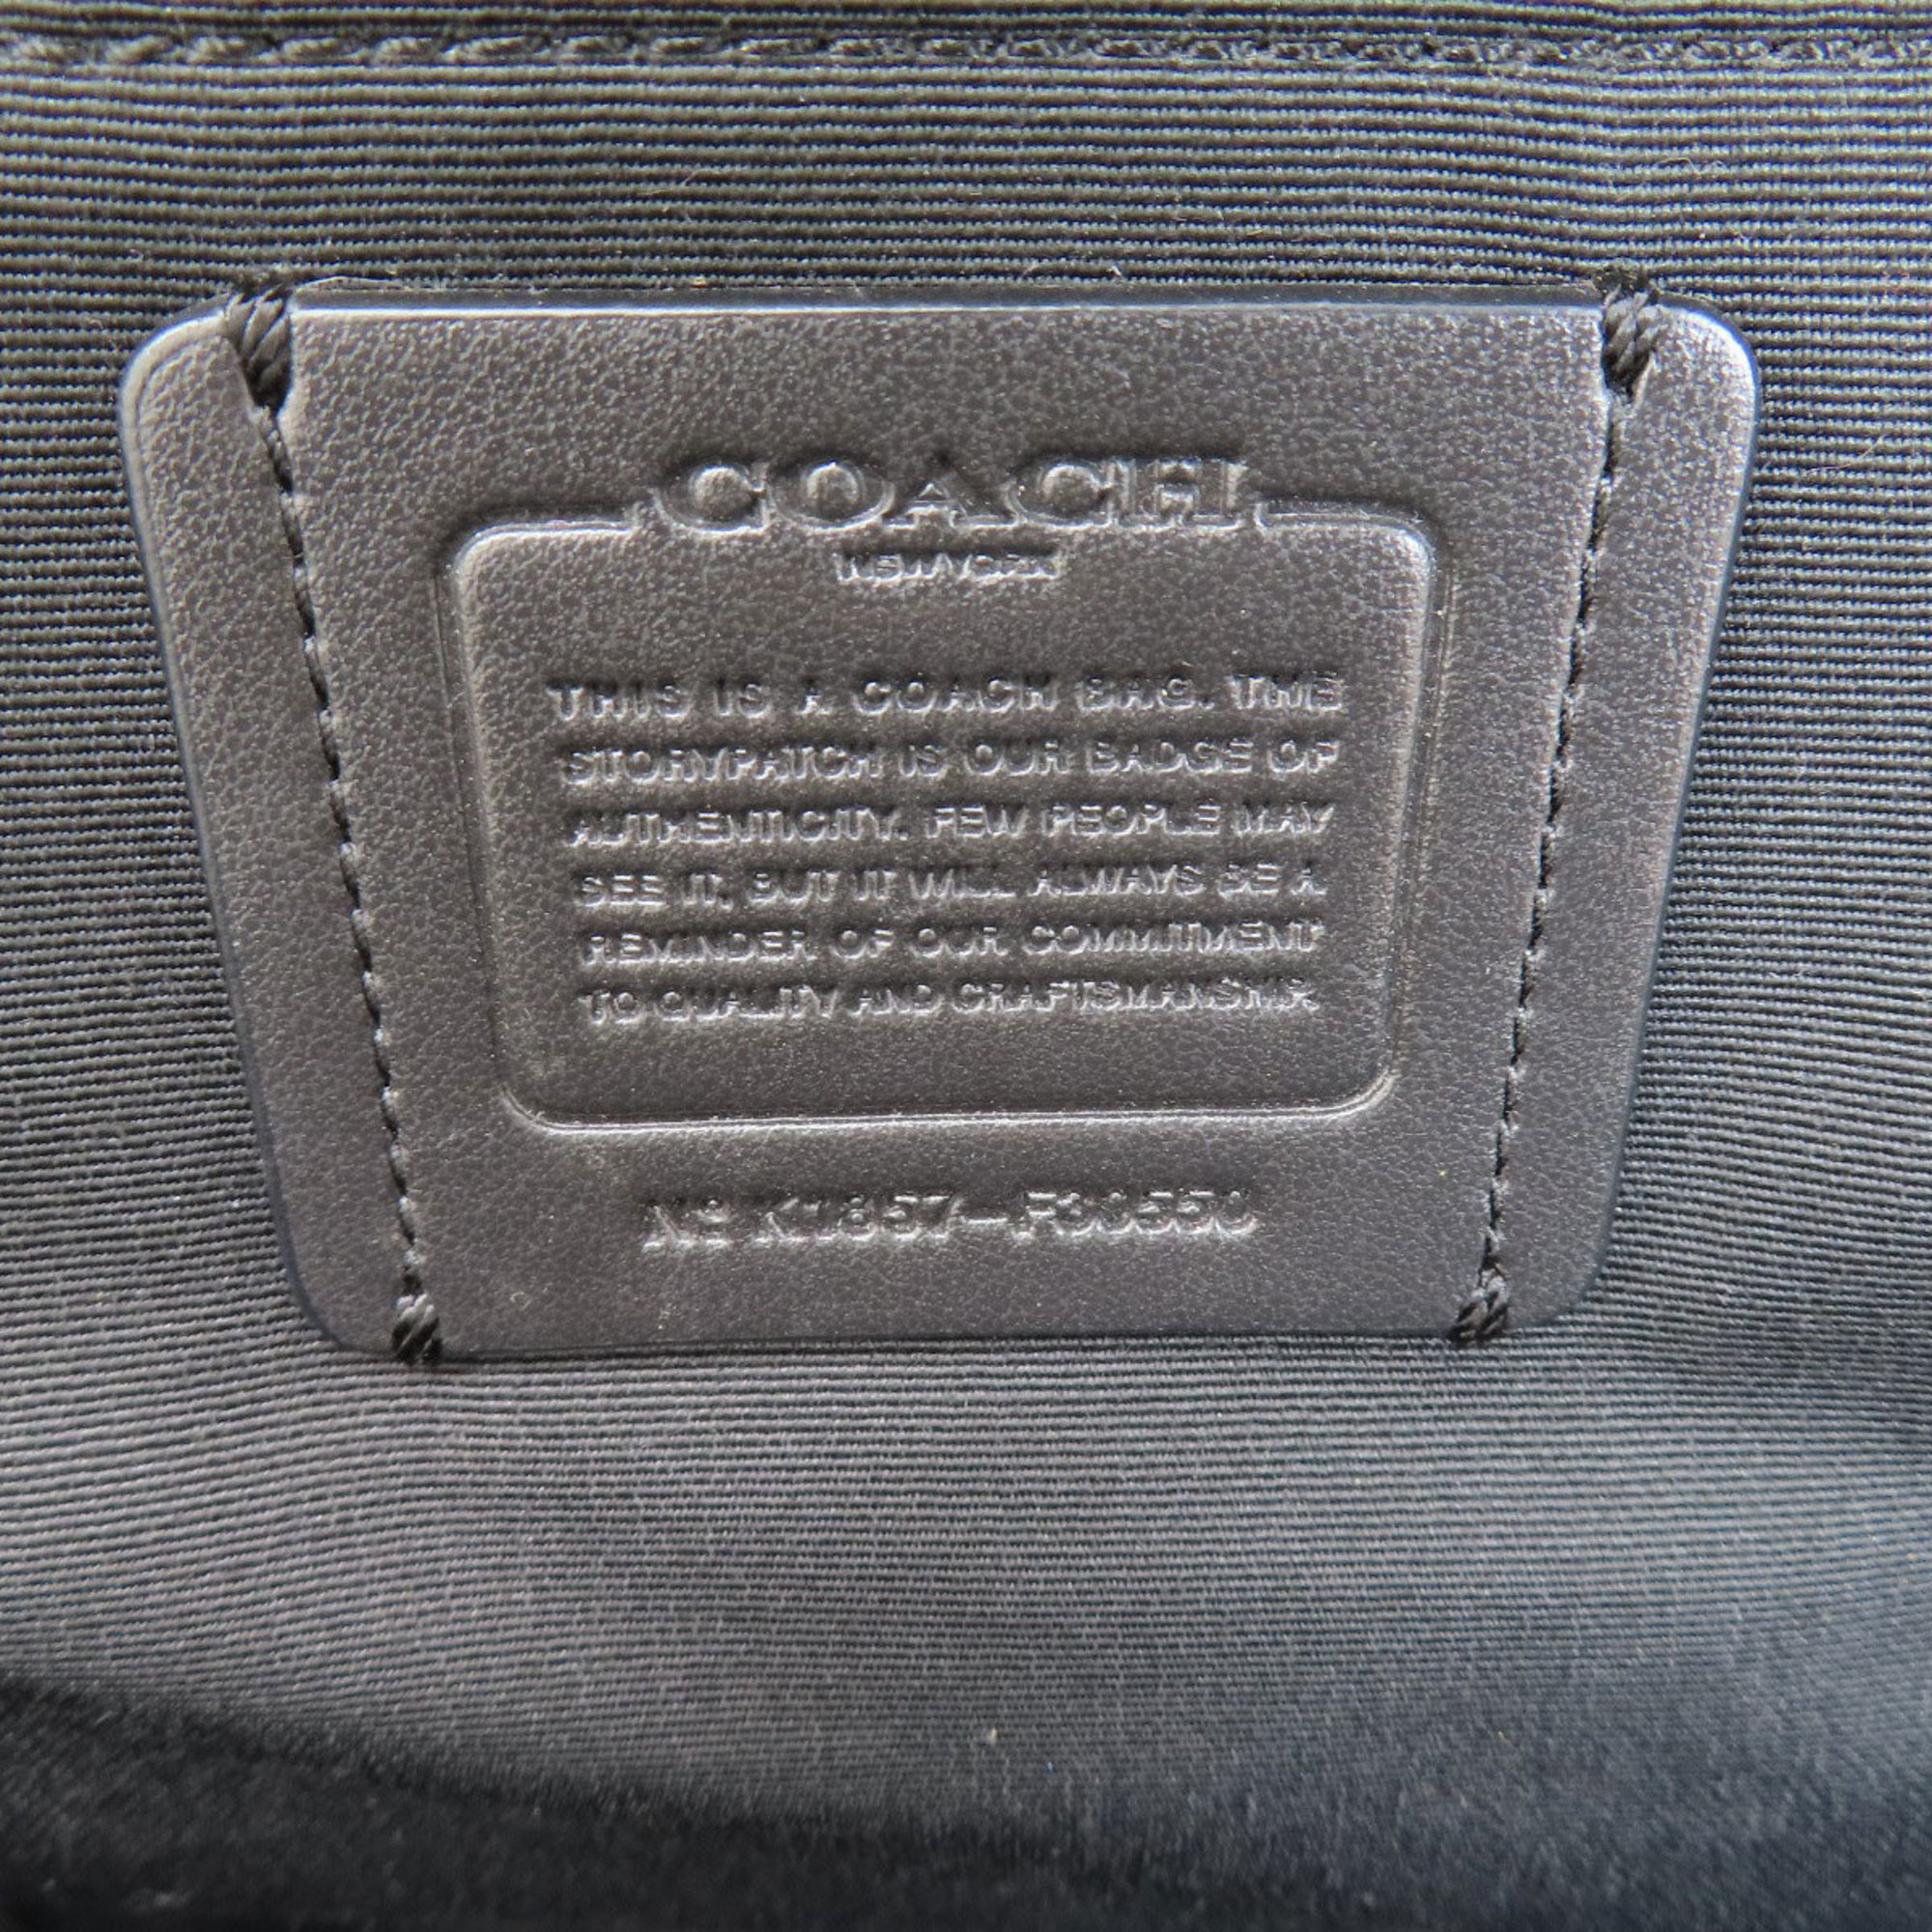 Coach F30550 Backpack/Daypack Leather Women's COACH